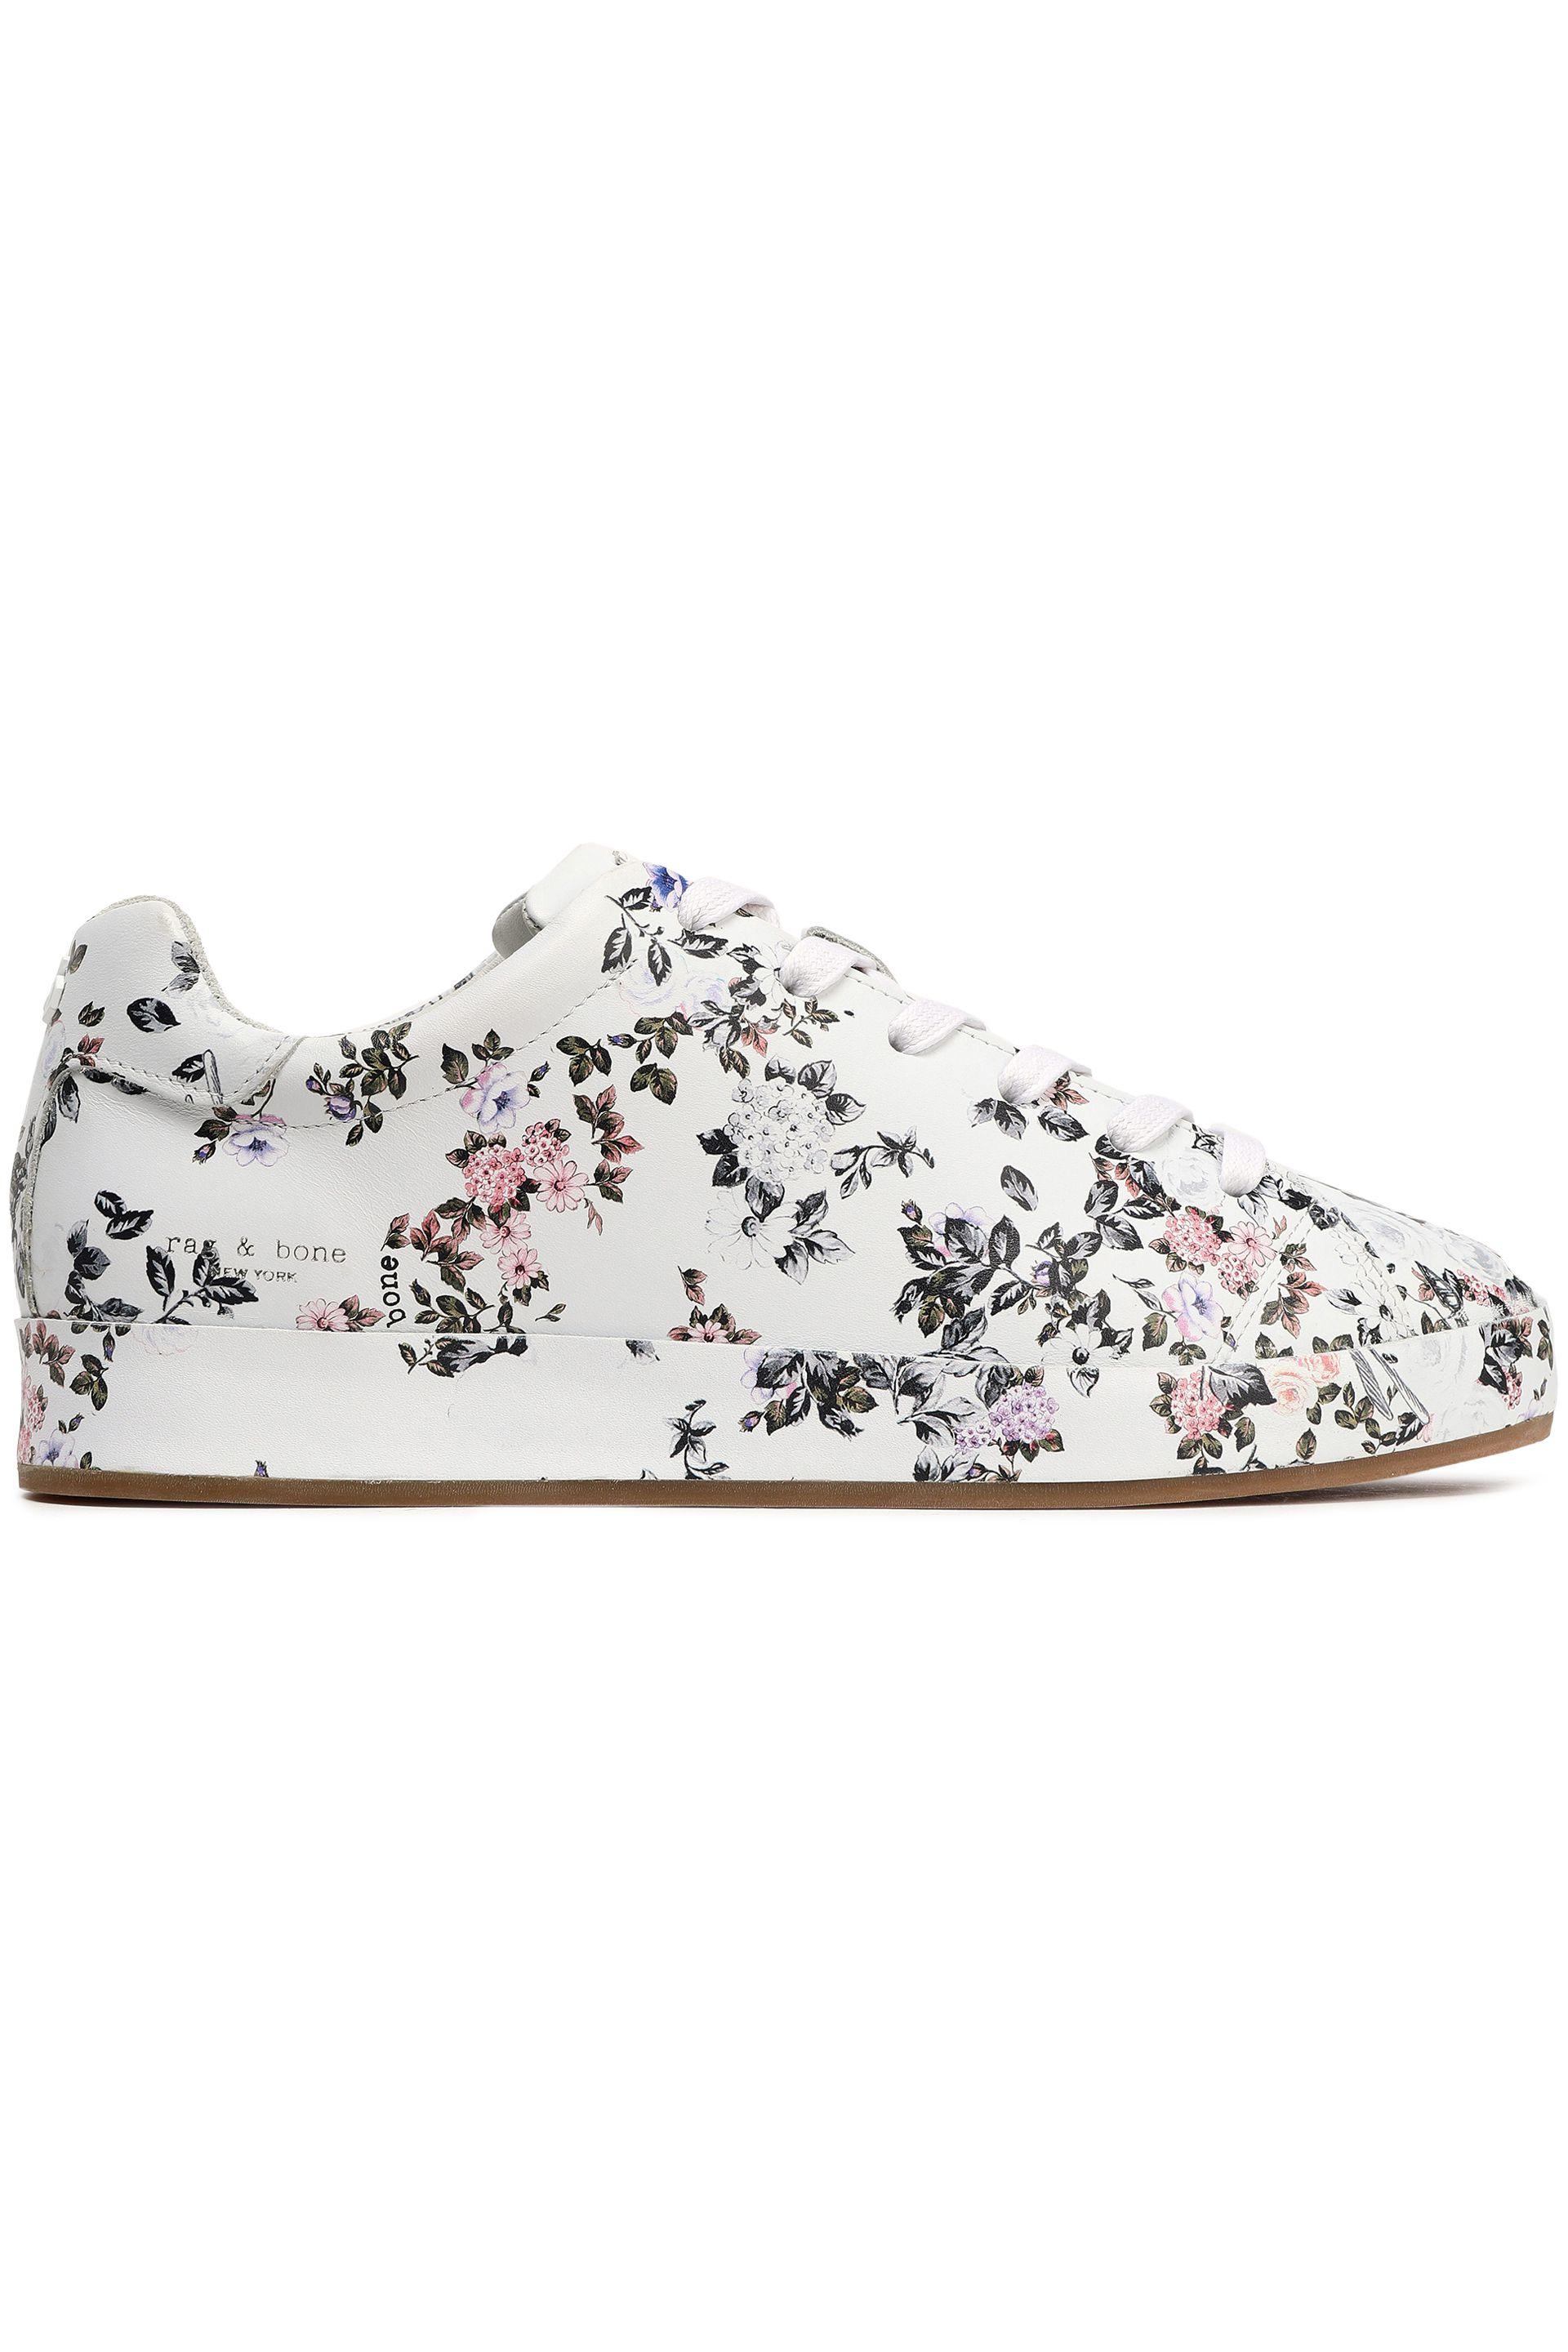 Bone Floral-print Leather Sneakers 